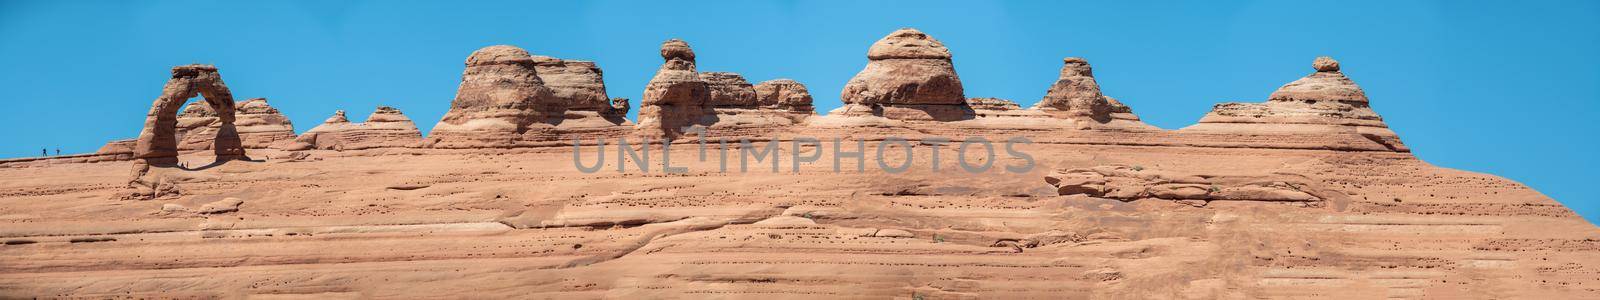 Delicate Arch panoramic aerial view from lower viewpoint, Arches National Park, Utah, USA